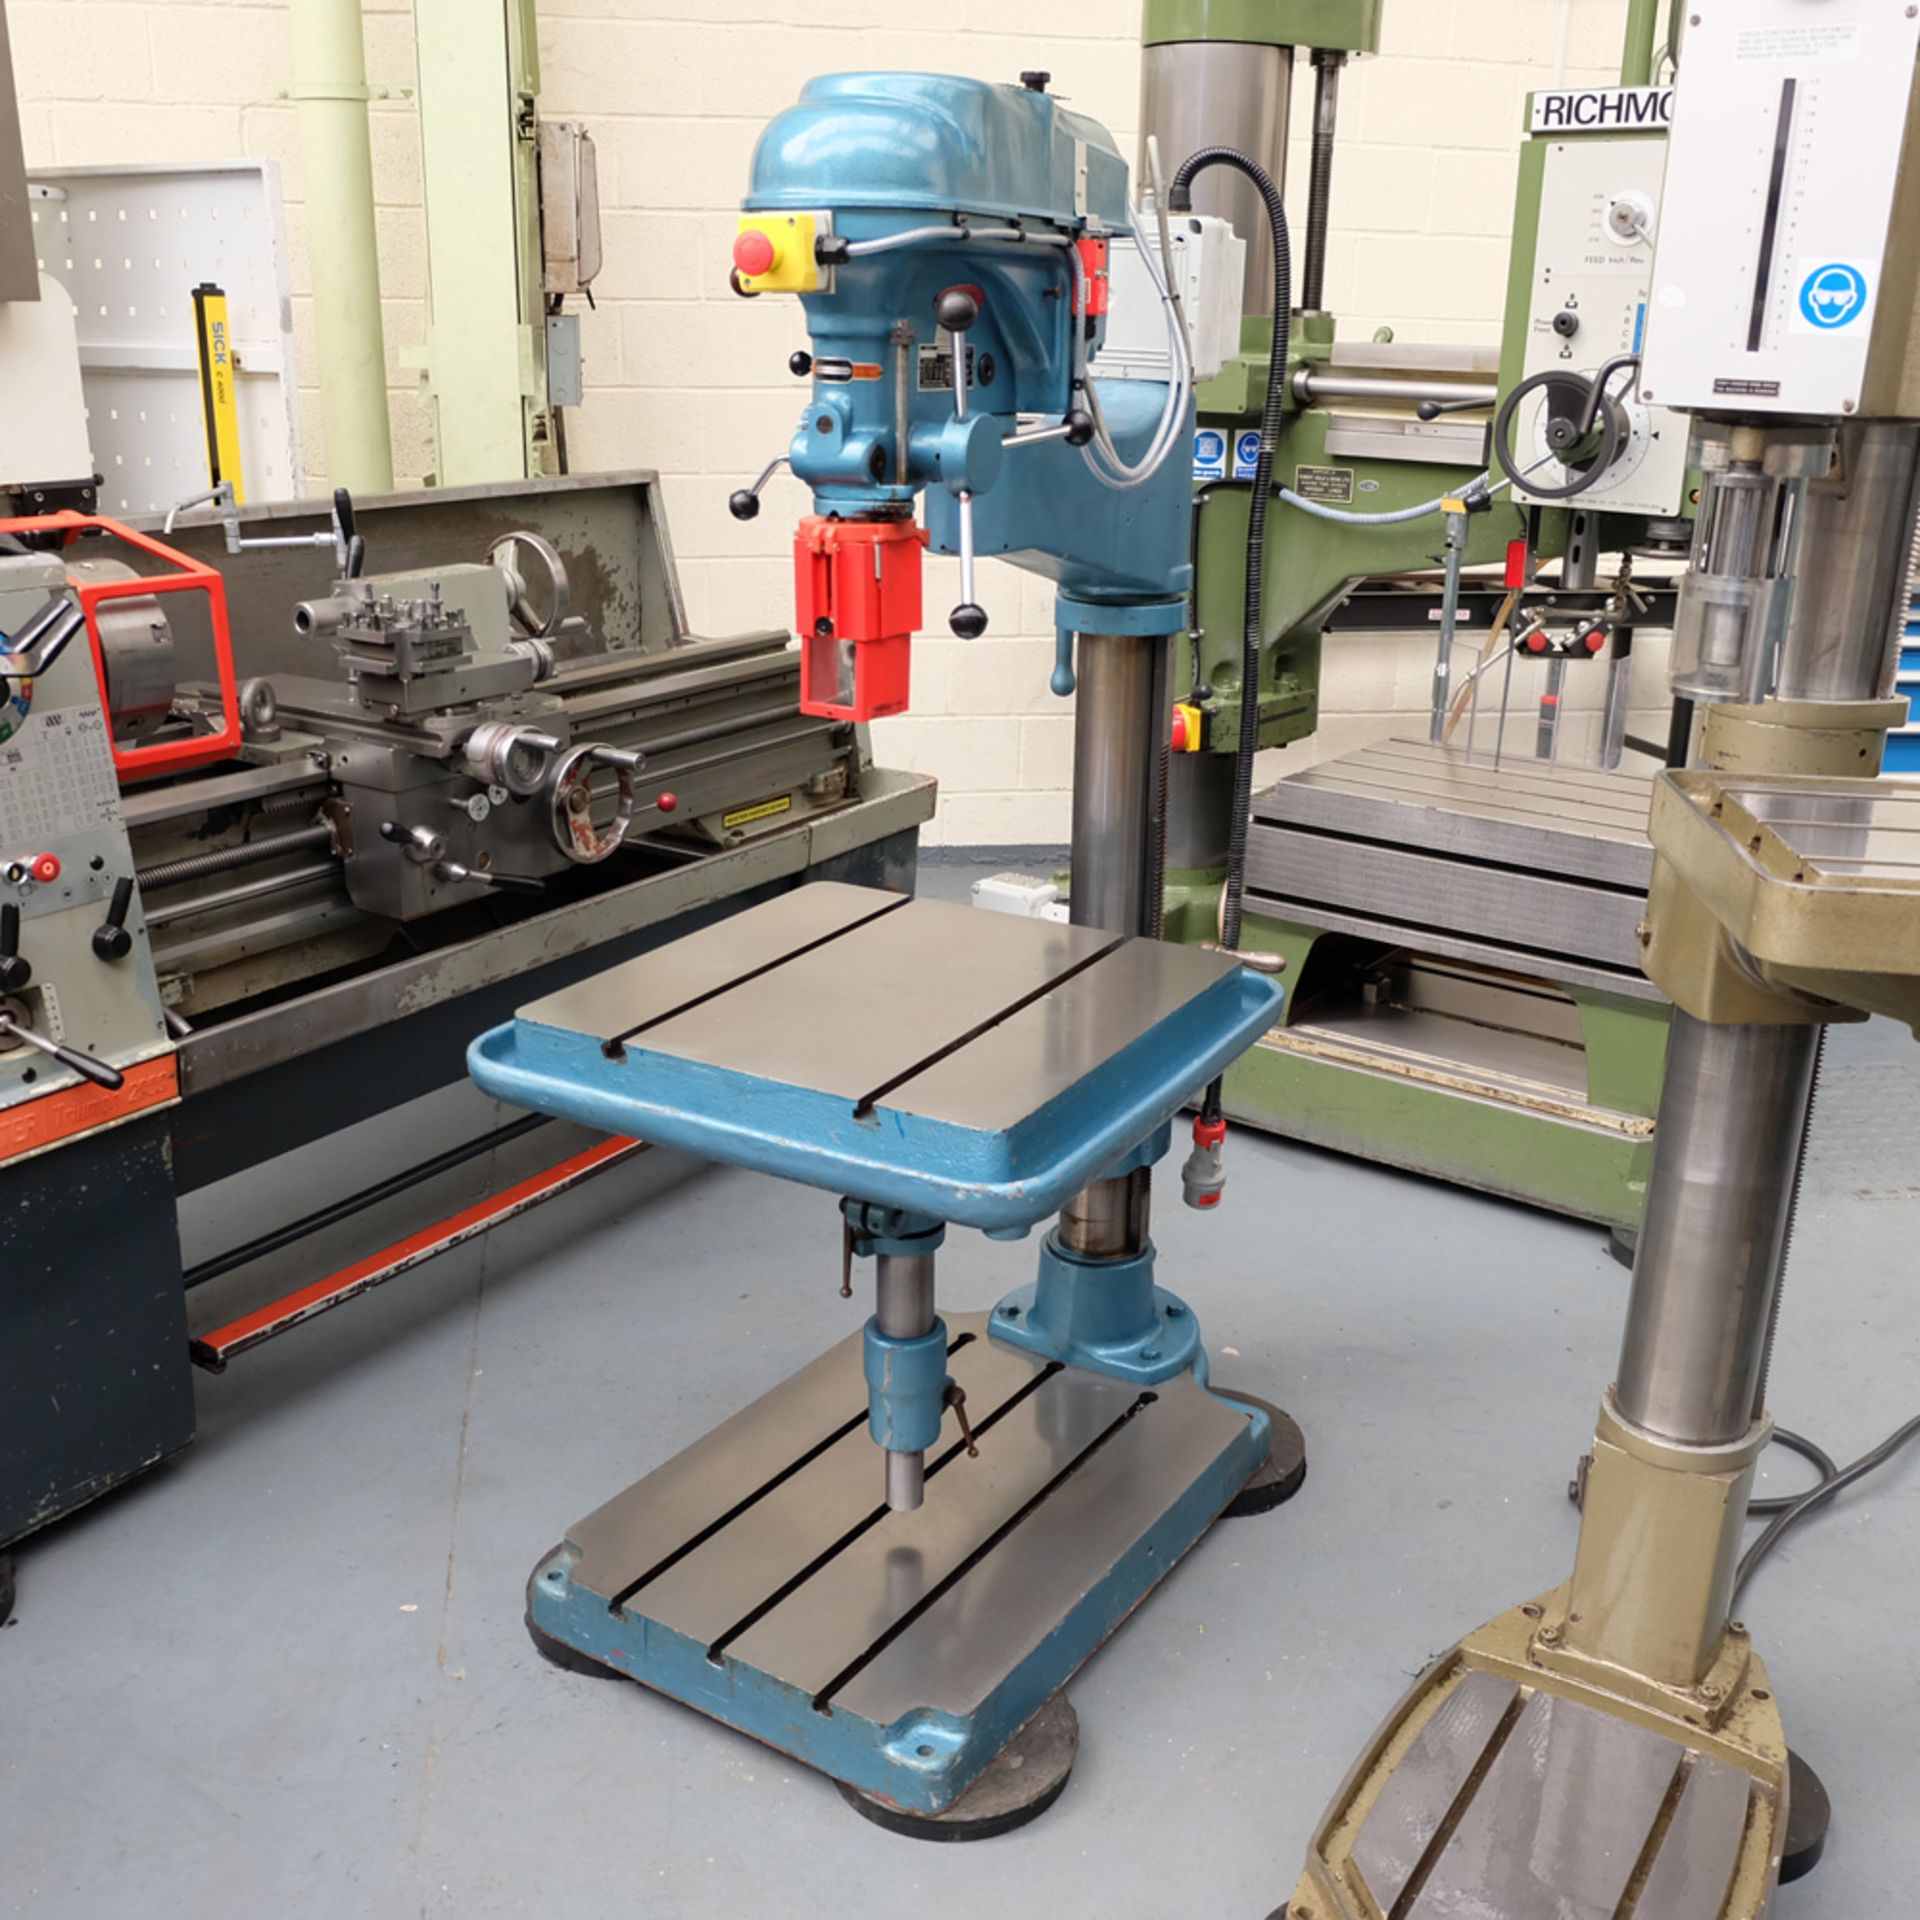 Meddings Type A10 Articulated Arm Drilling Machine. Table Size 24" x 24".